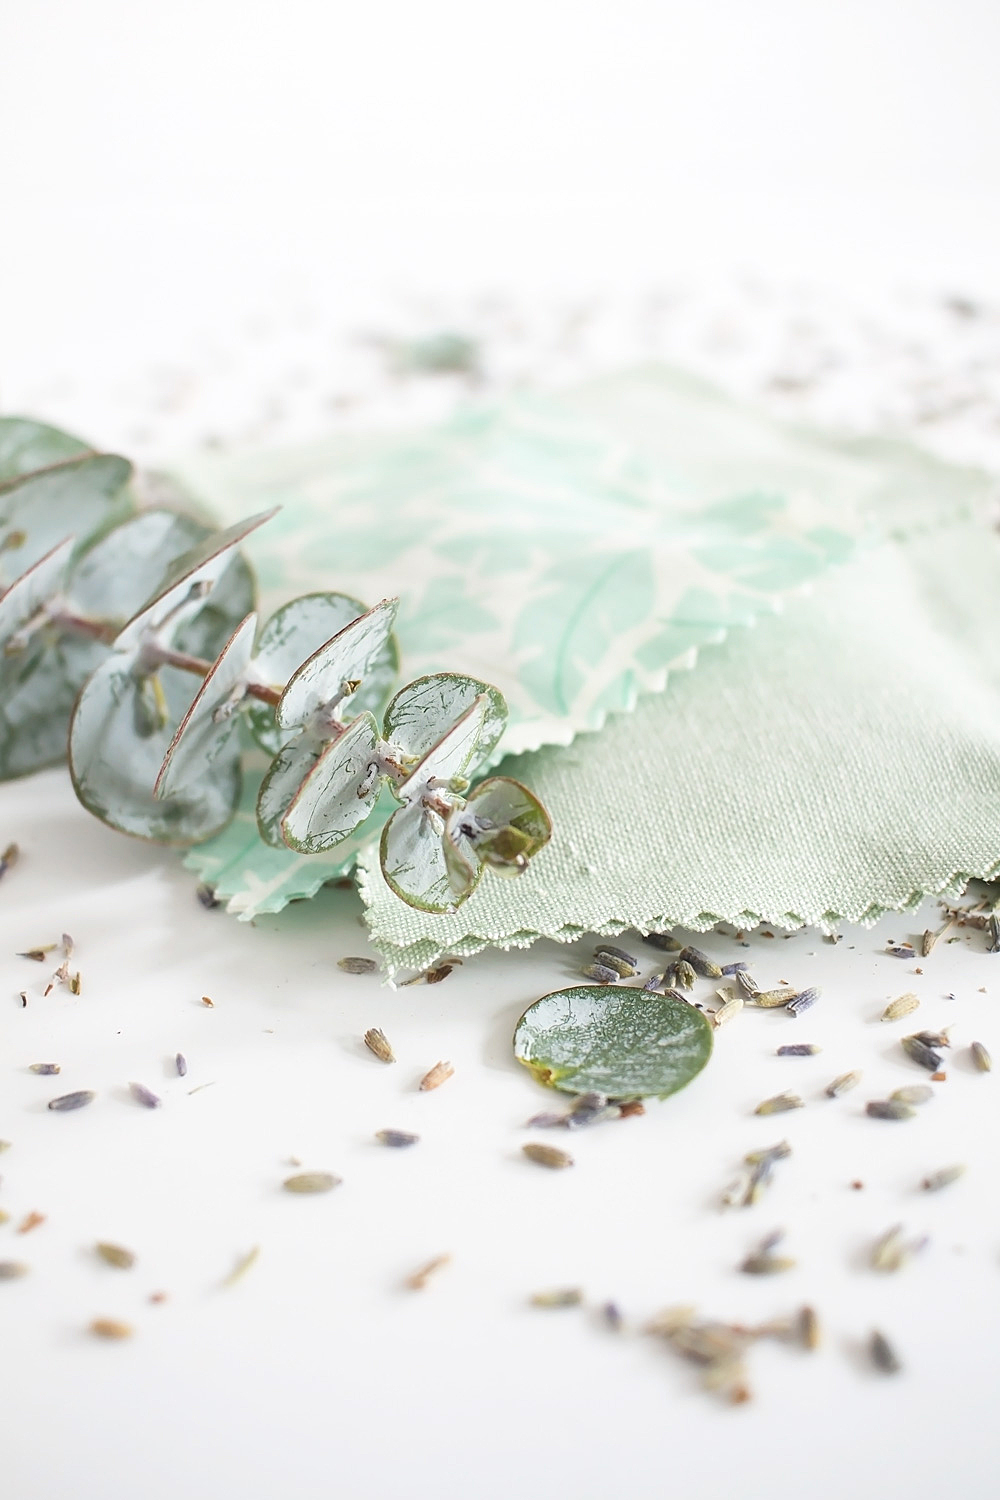 Make these DIY lavender eucalyptus sachets in just 30 minutes using fabric glue!